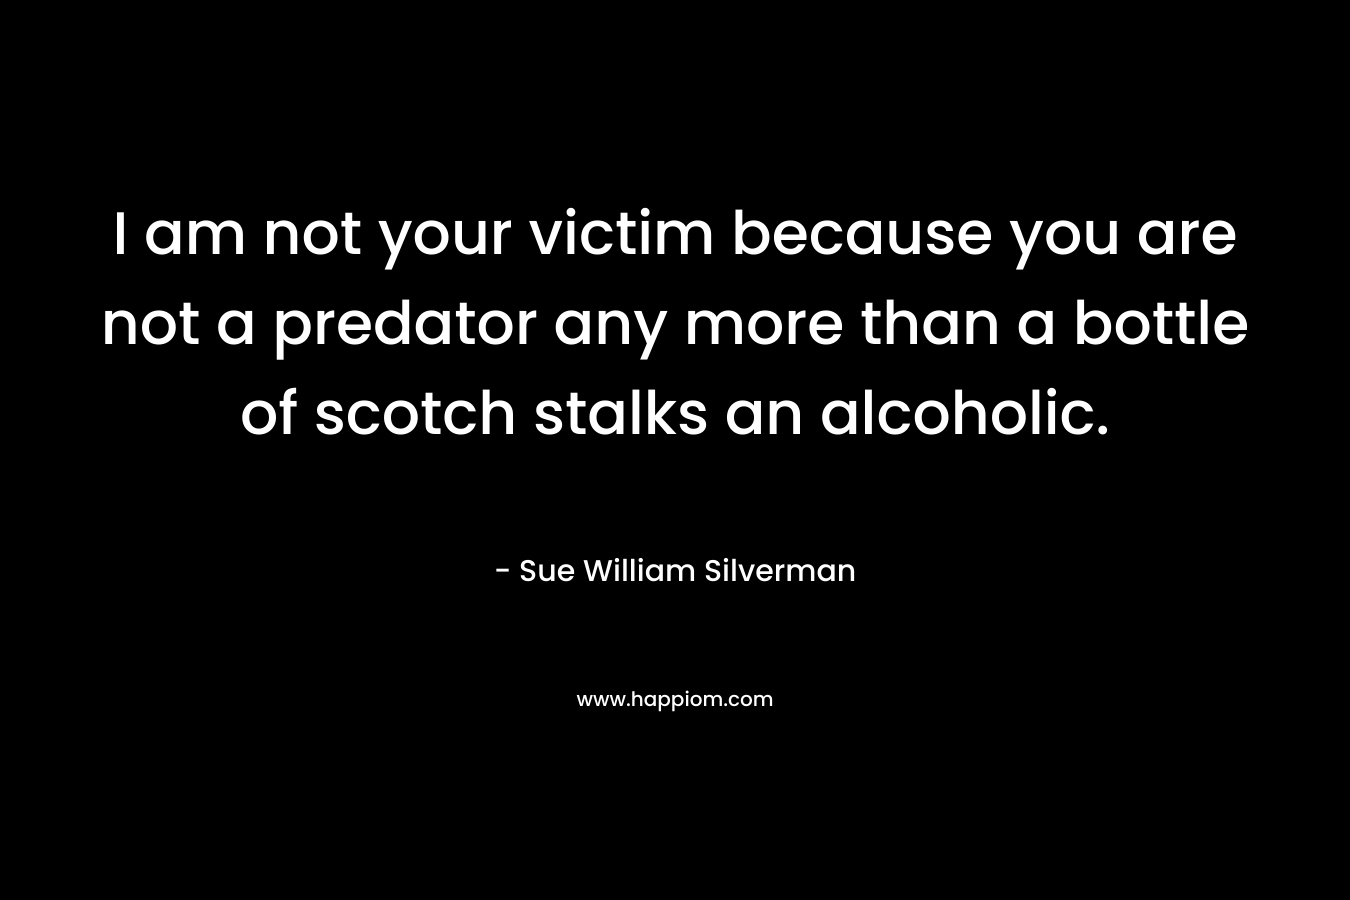 I am not your victim because you are not a predator any more than a bottle of scotch stalks an alcoholic.